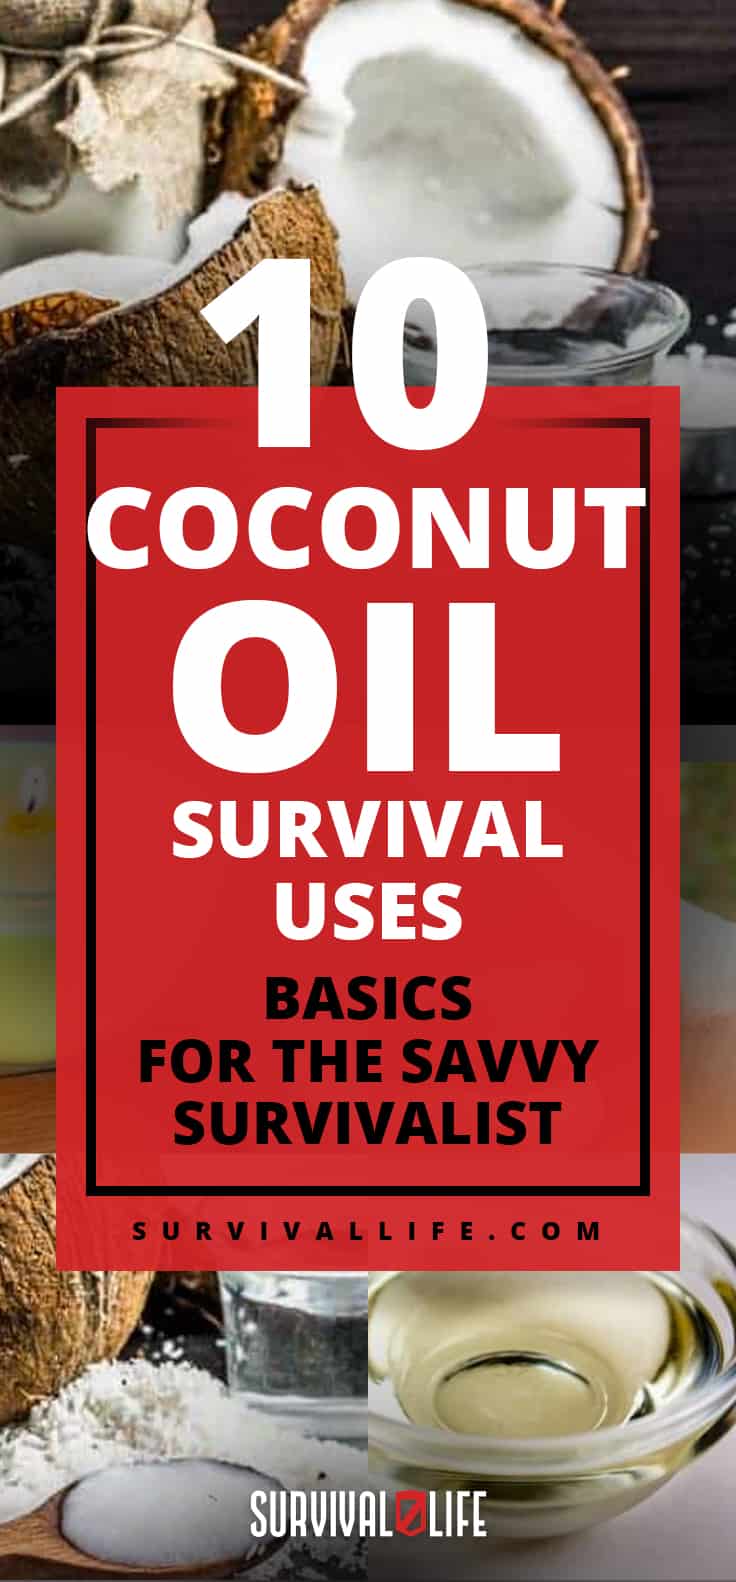 10 Coconut Oil Survival Uses | Basics For The Savvy Survivalist